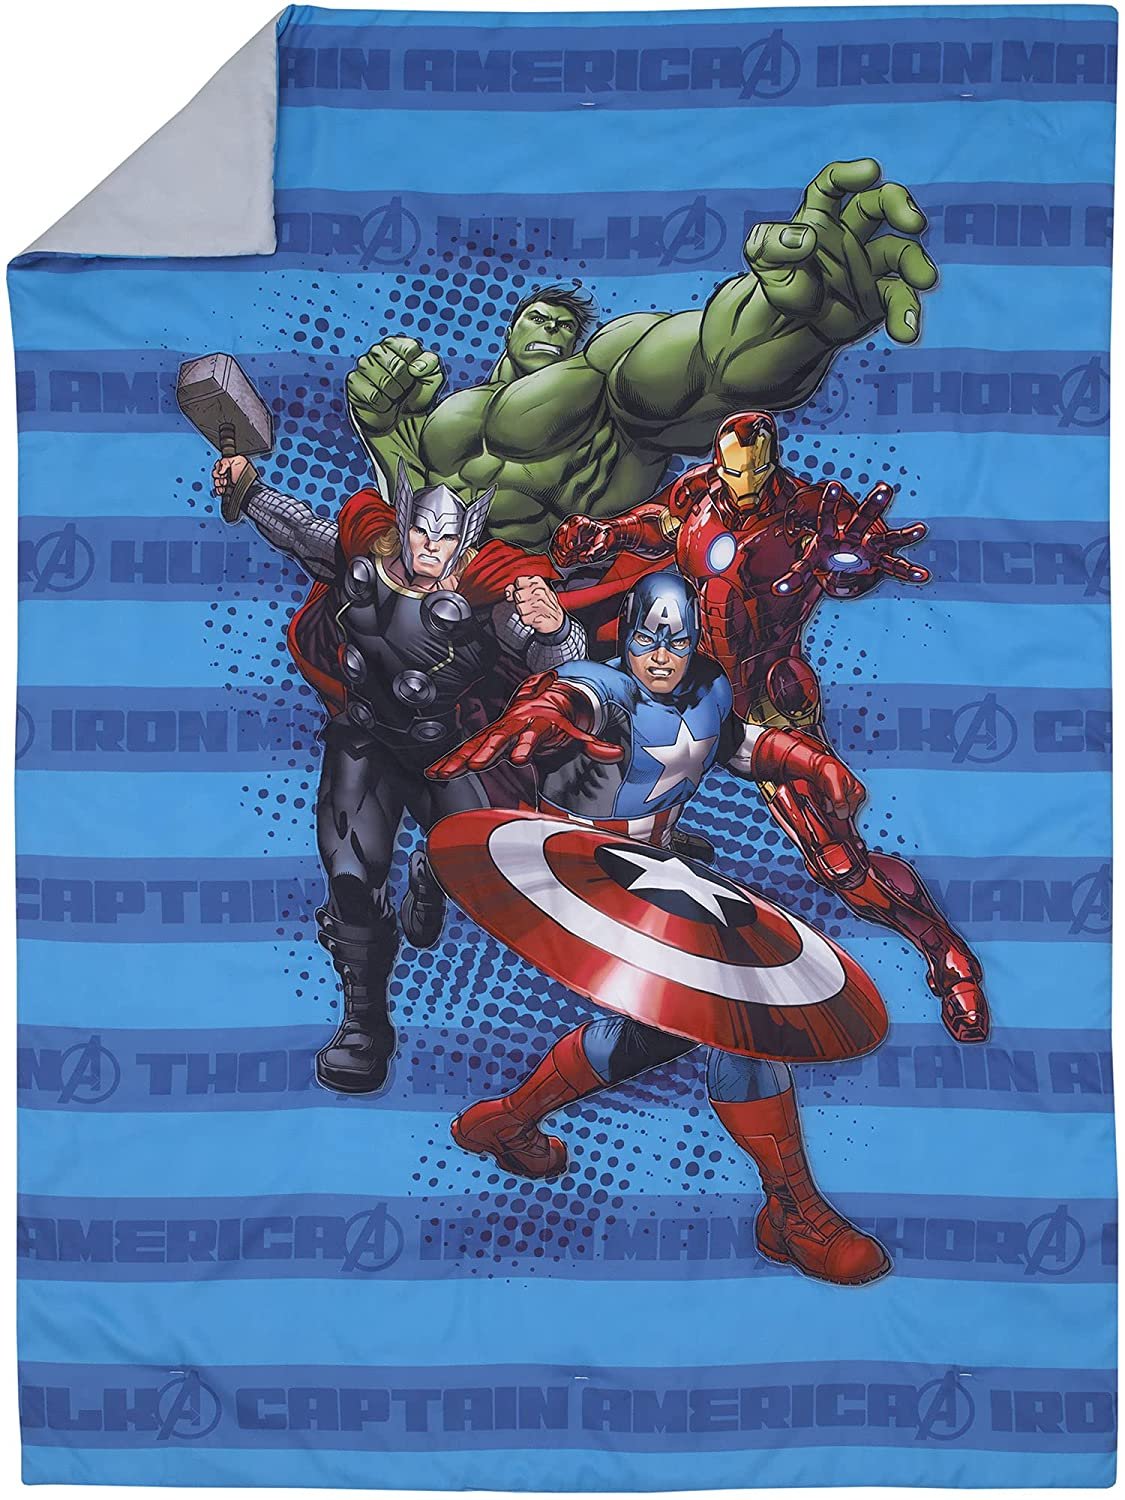 Crown Crafts Marvel Avengers 4 Piece Bedding Sets, Toddler Bed with Bedspread, Fitted Bottom Sheet, Flat Top Sheet, Pillowcase - image 3 of 7